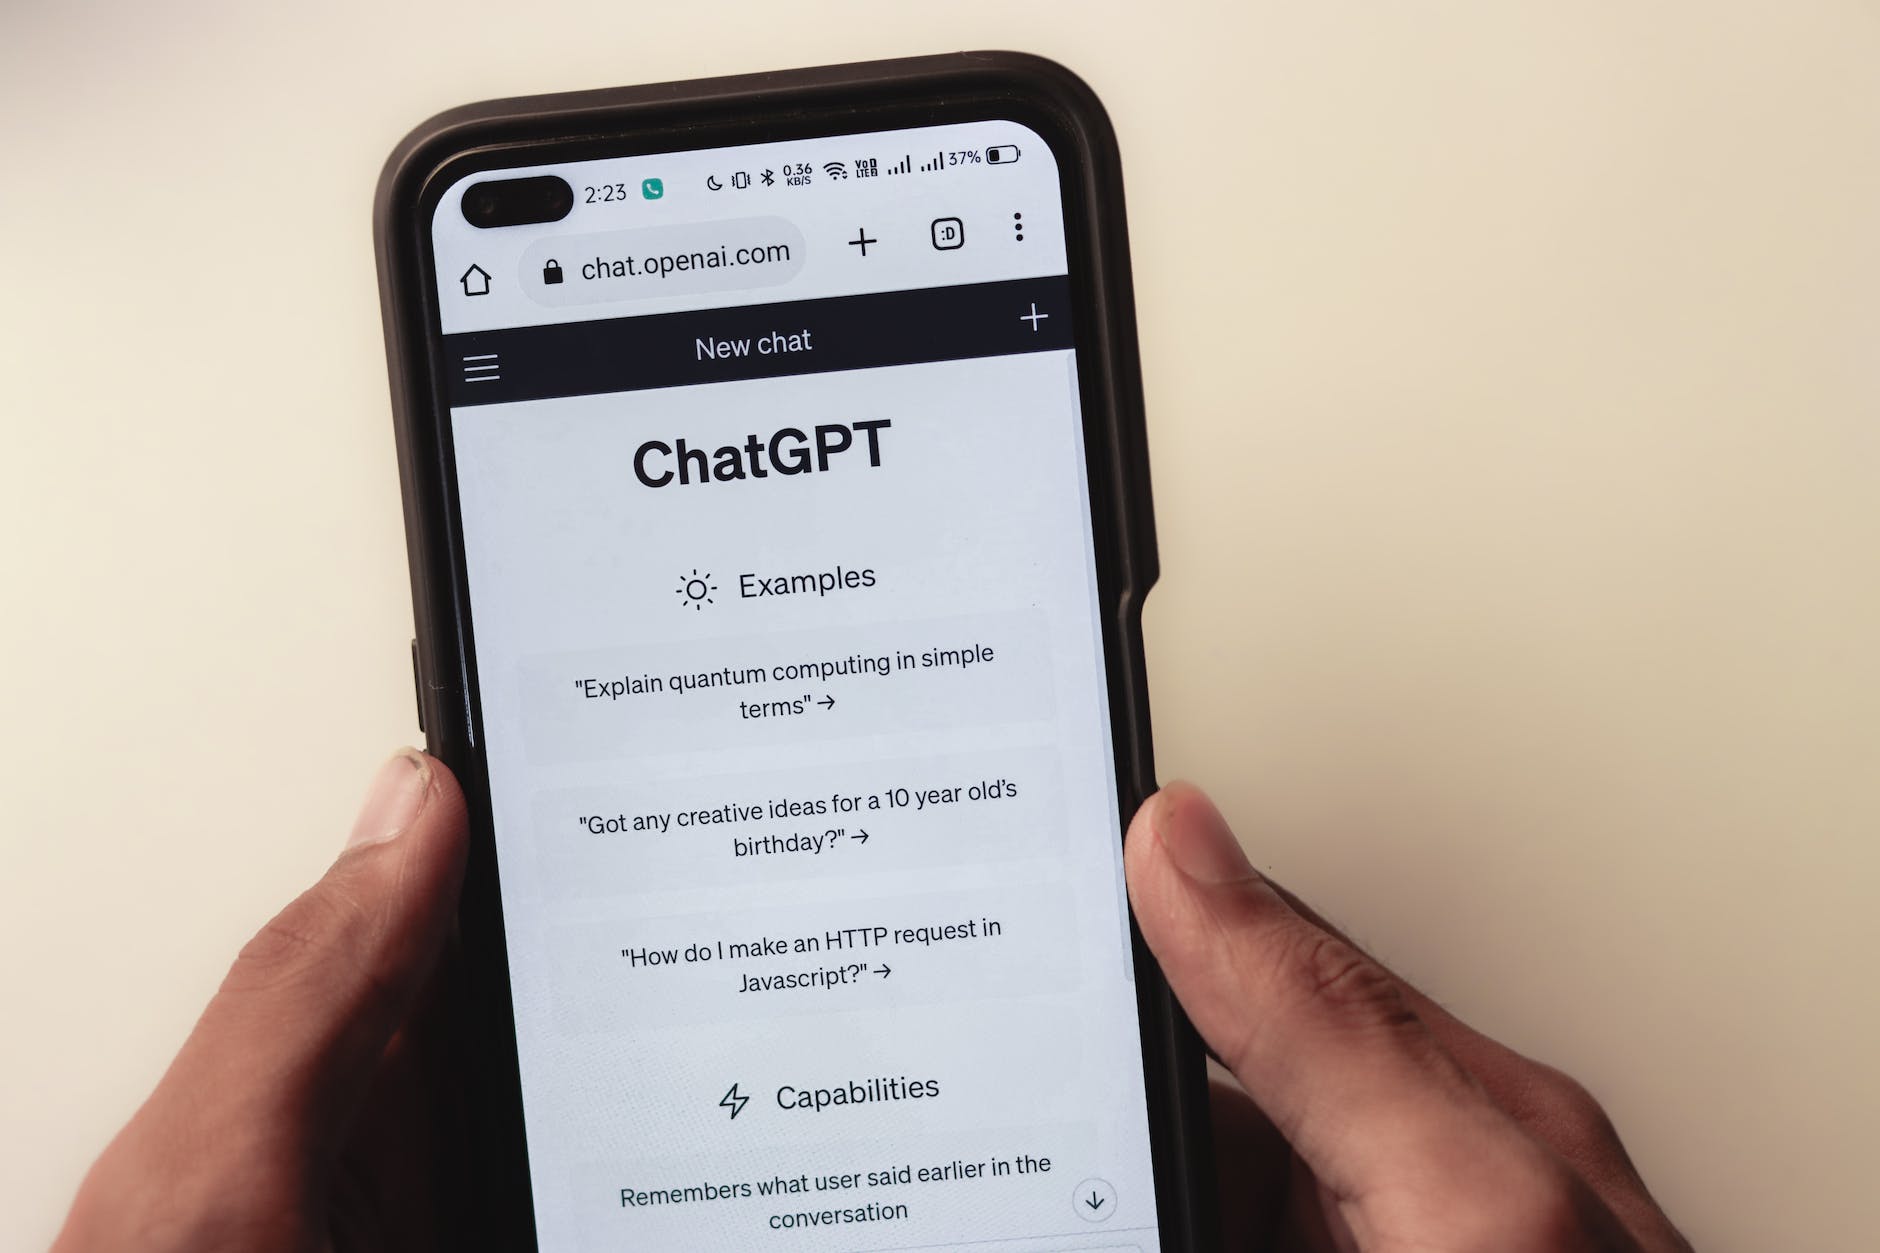 webpage of chatgpt a prototype ai chatbot is seen on the website of openai on a smartphone examples capabilities and limitations are shown